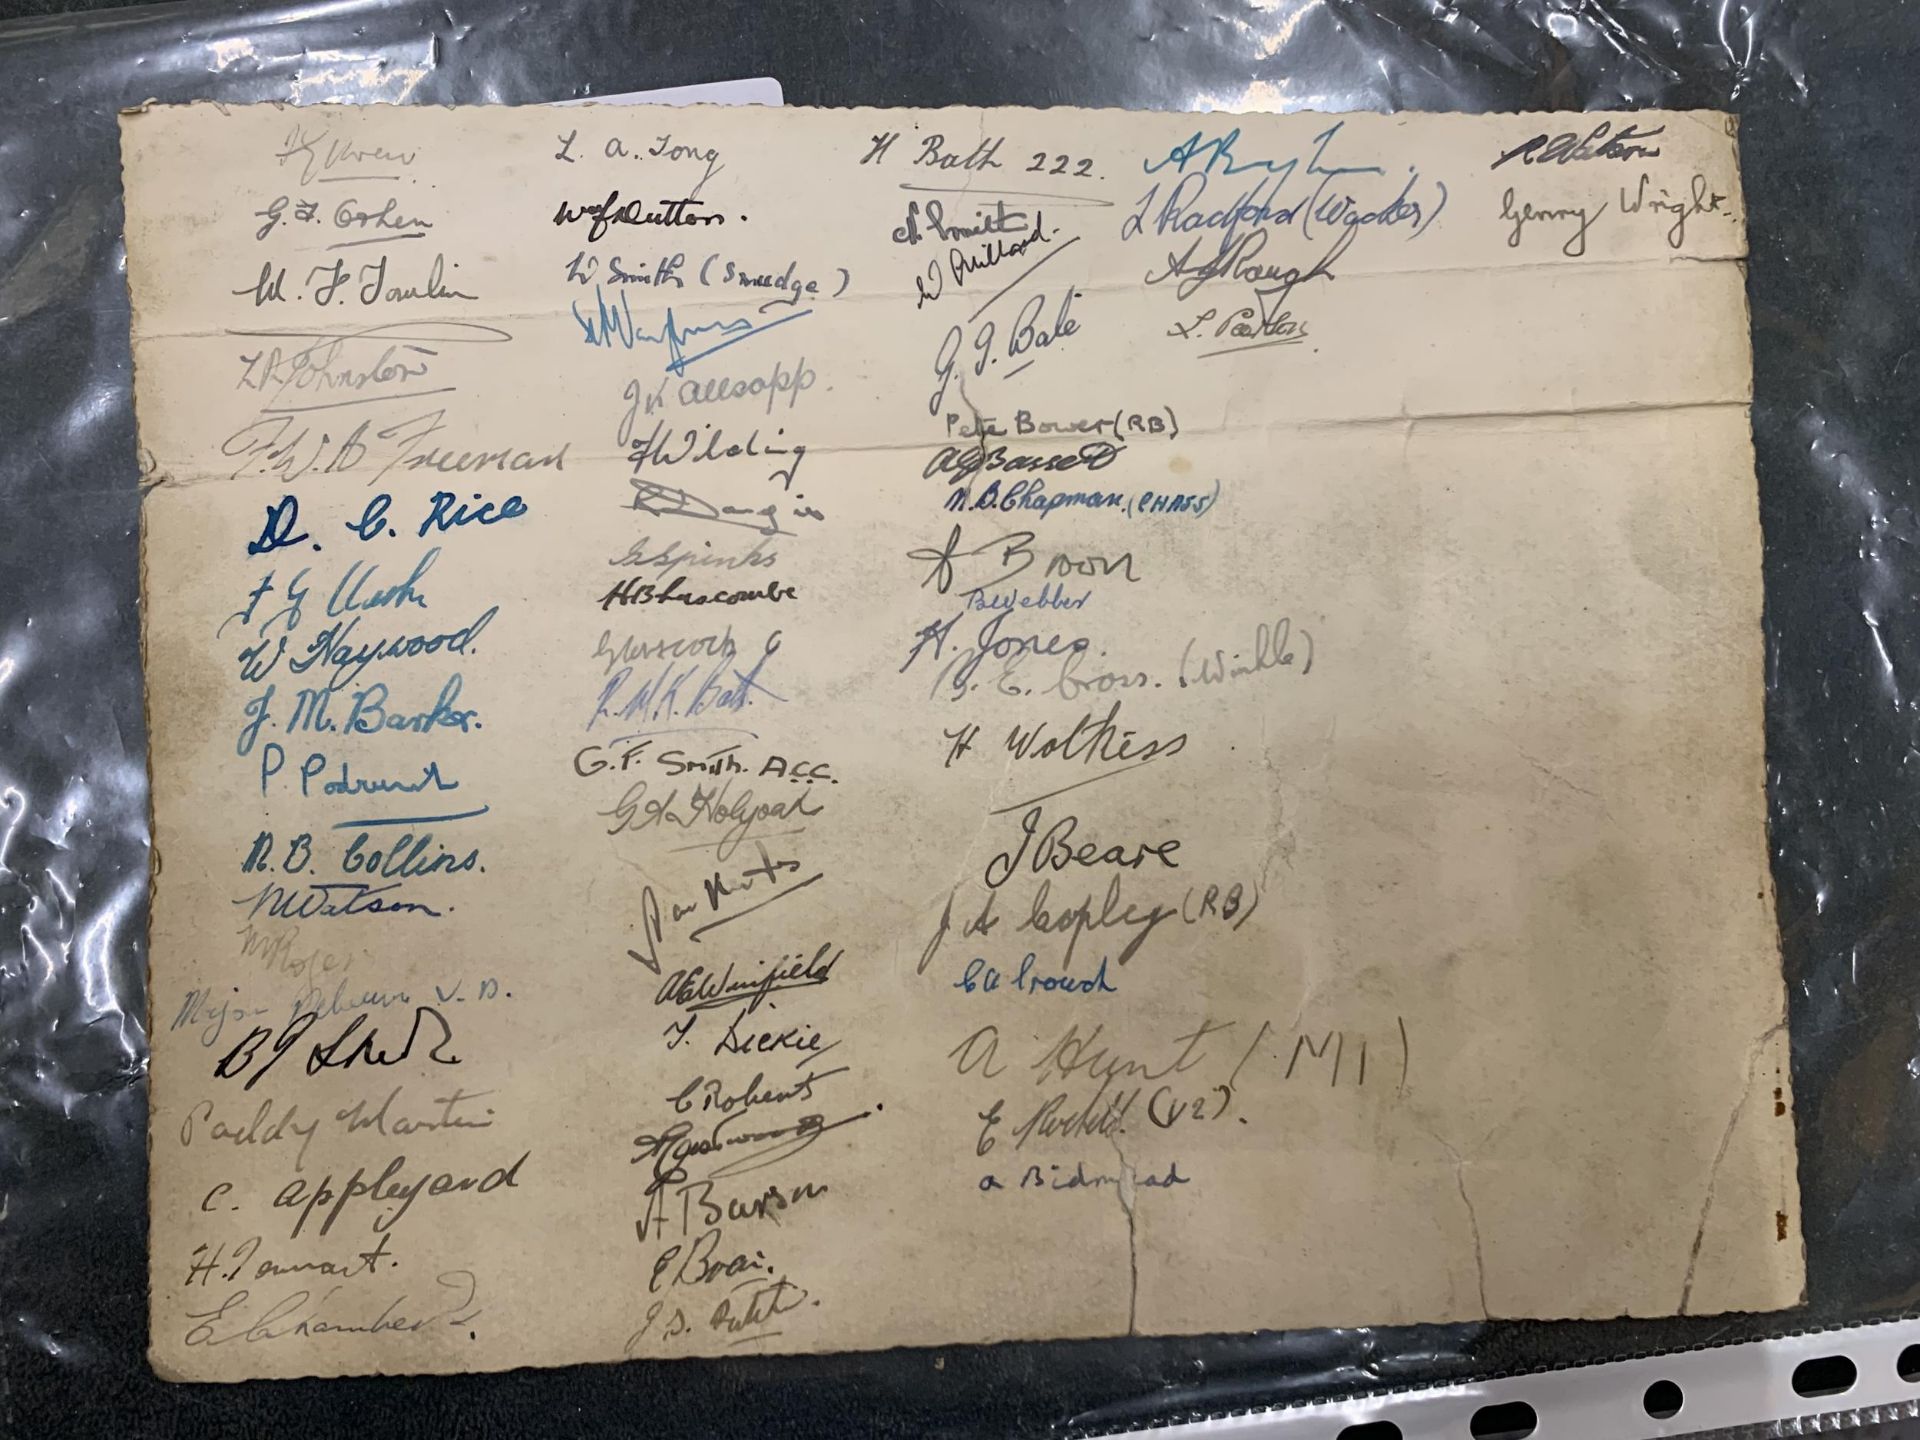 A 1ST CM BATTERY R.A MALINES DEC 1945 PHOTO WITH ALL SIGNATURES ON BACK - Image 2 of 2